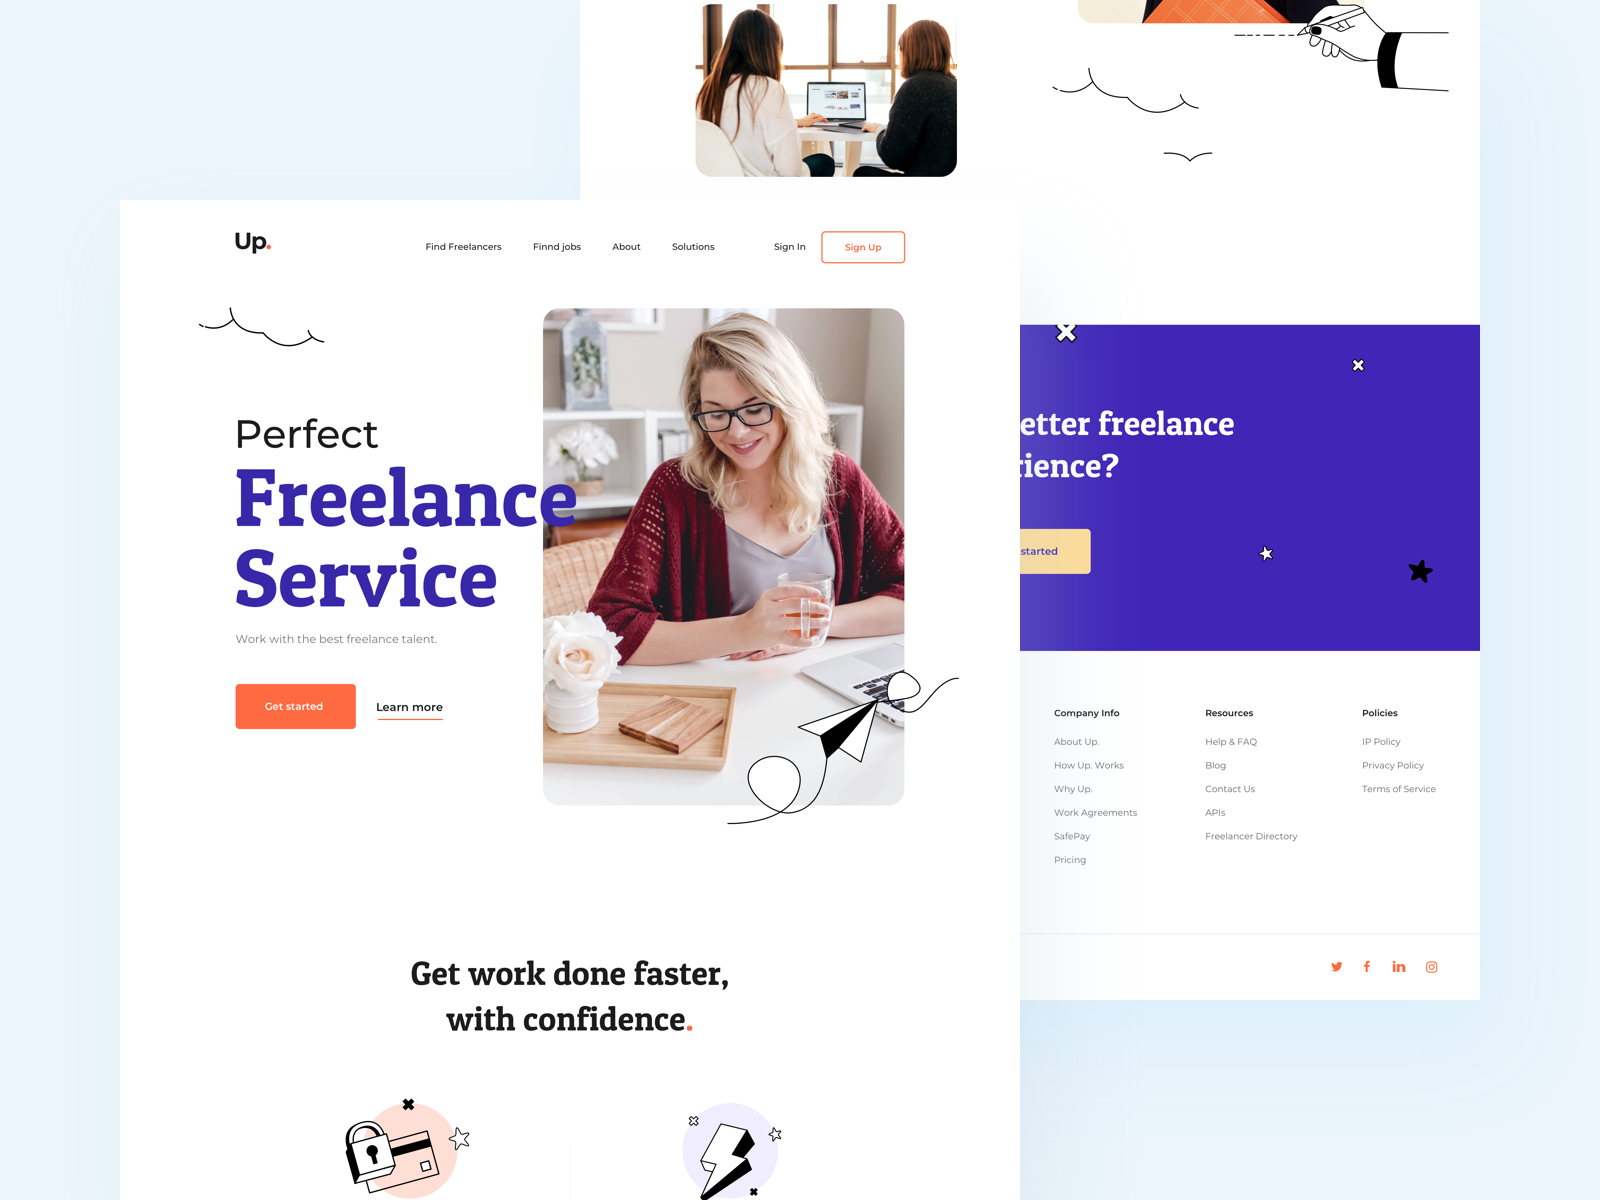 The Uplacner freelance product page interaction